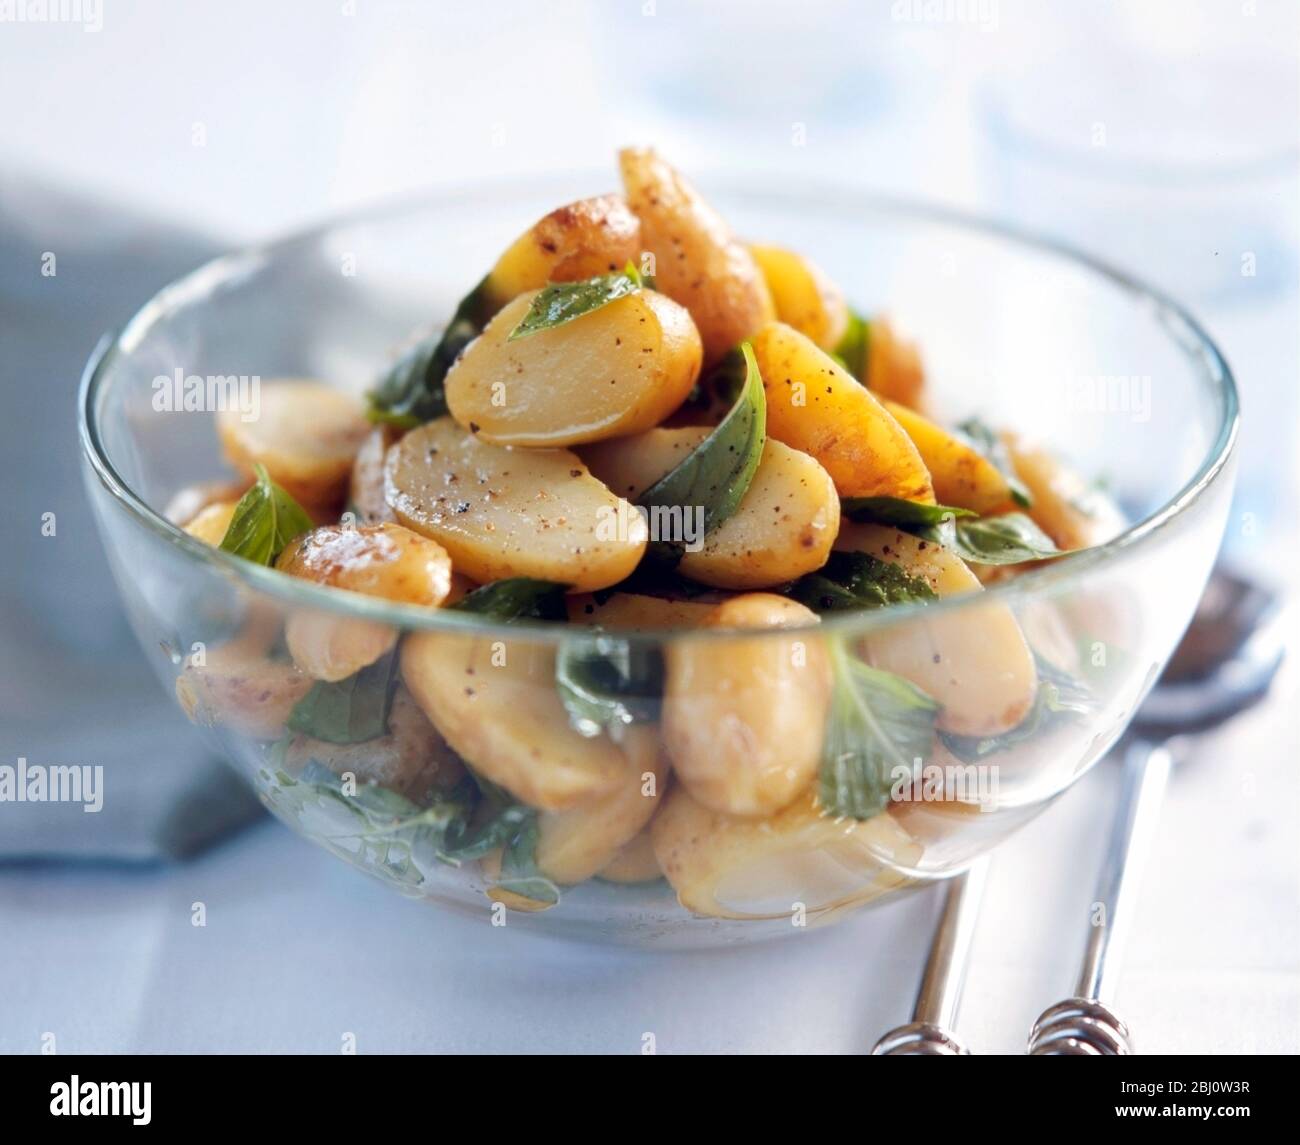 Halved, baby new potatoes cooked in their skins, dressed with vinaigrette with whole grain mustard and black pepper, and sprinkled with mint leaves - Stock Photo